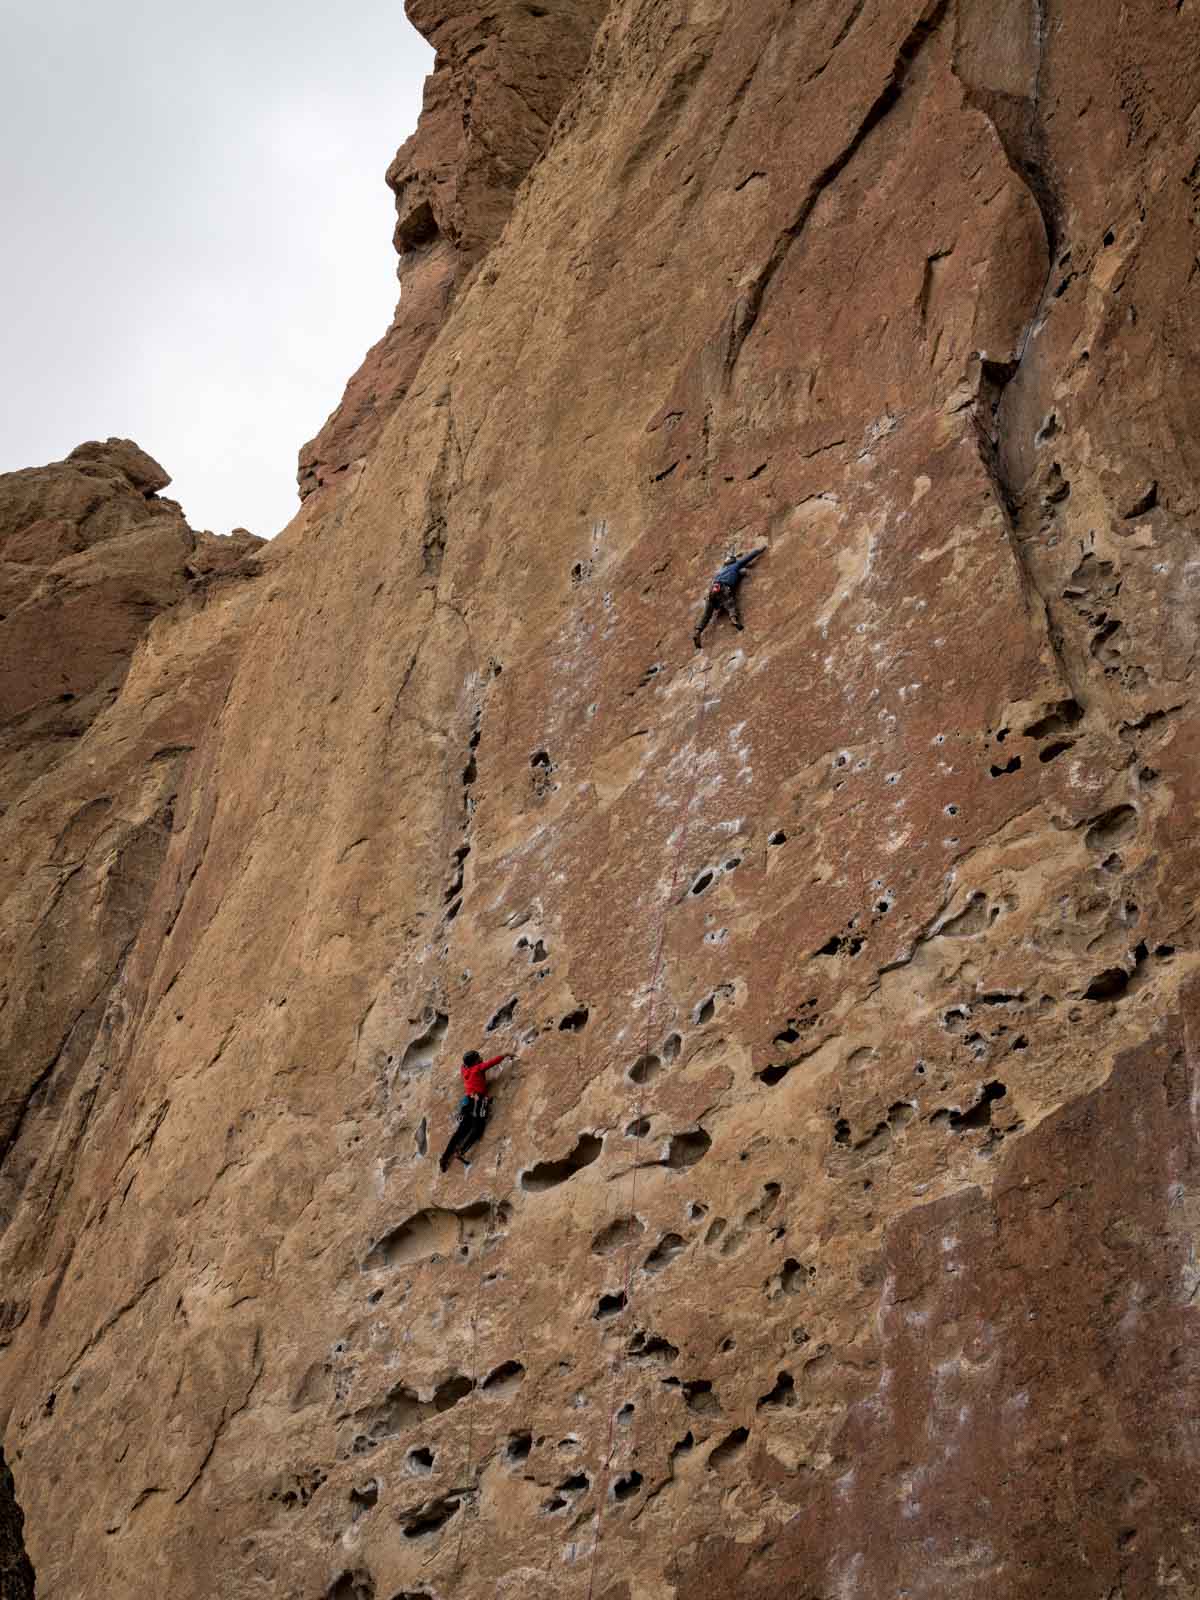 People rock climbing on Smith Rock — add this to your list if you’re wondering what to do in Bend